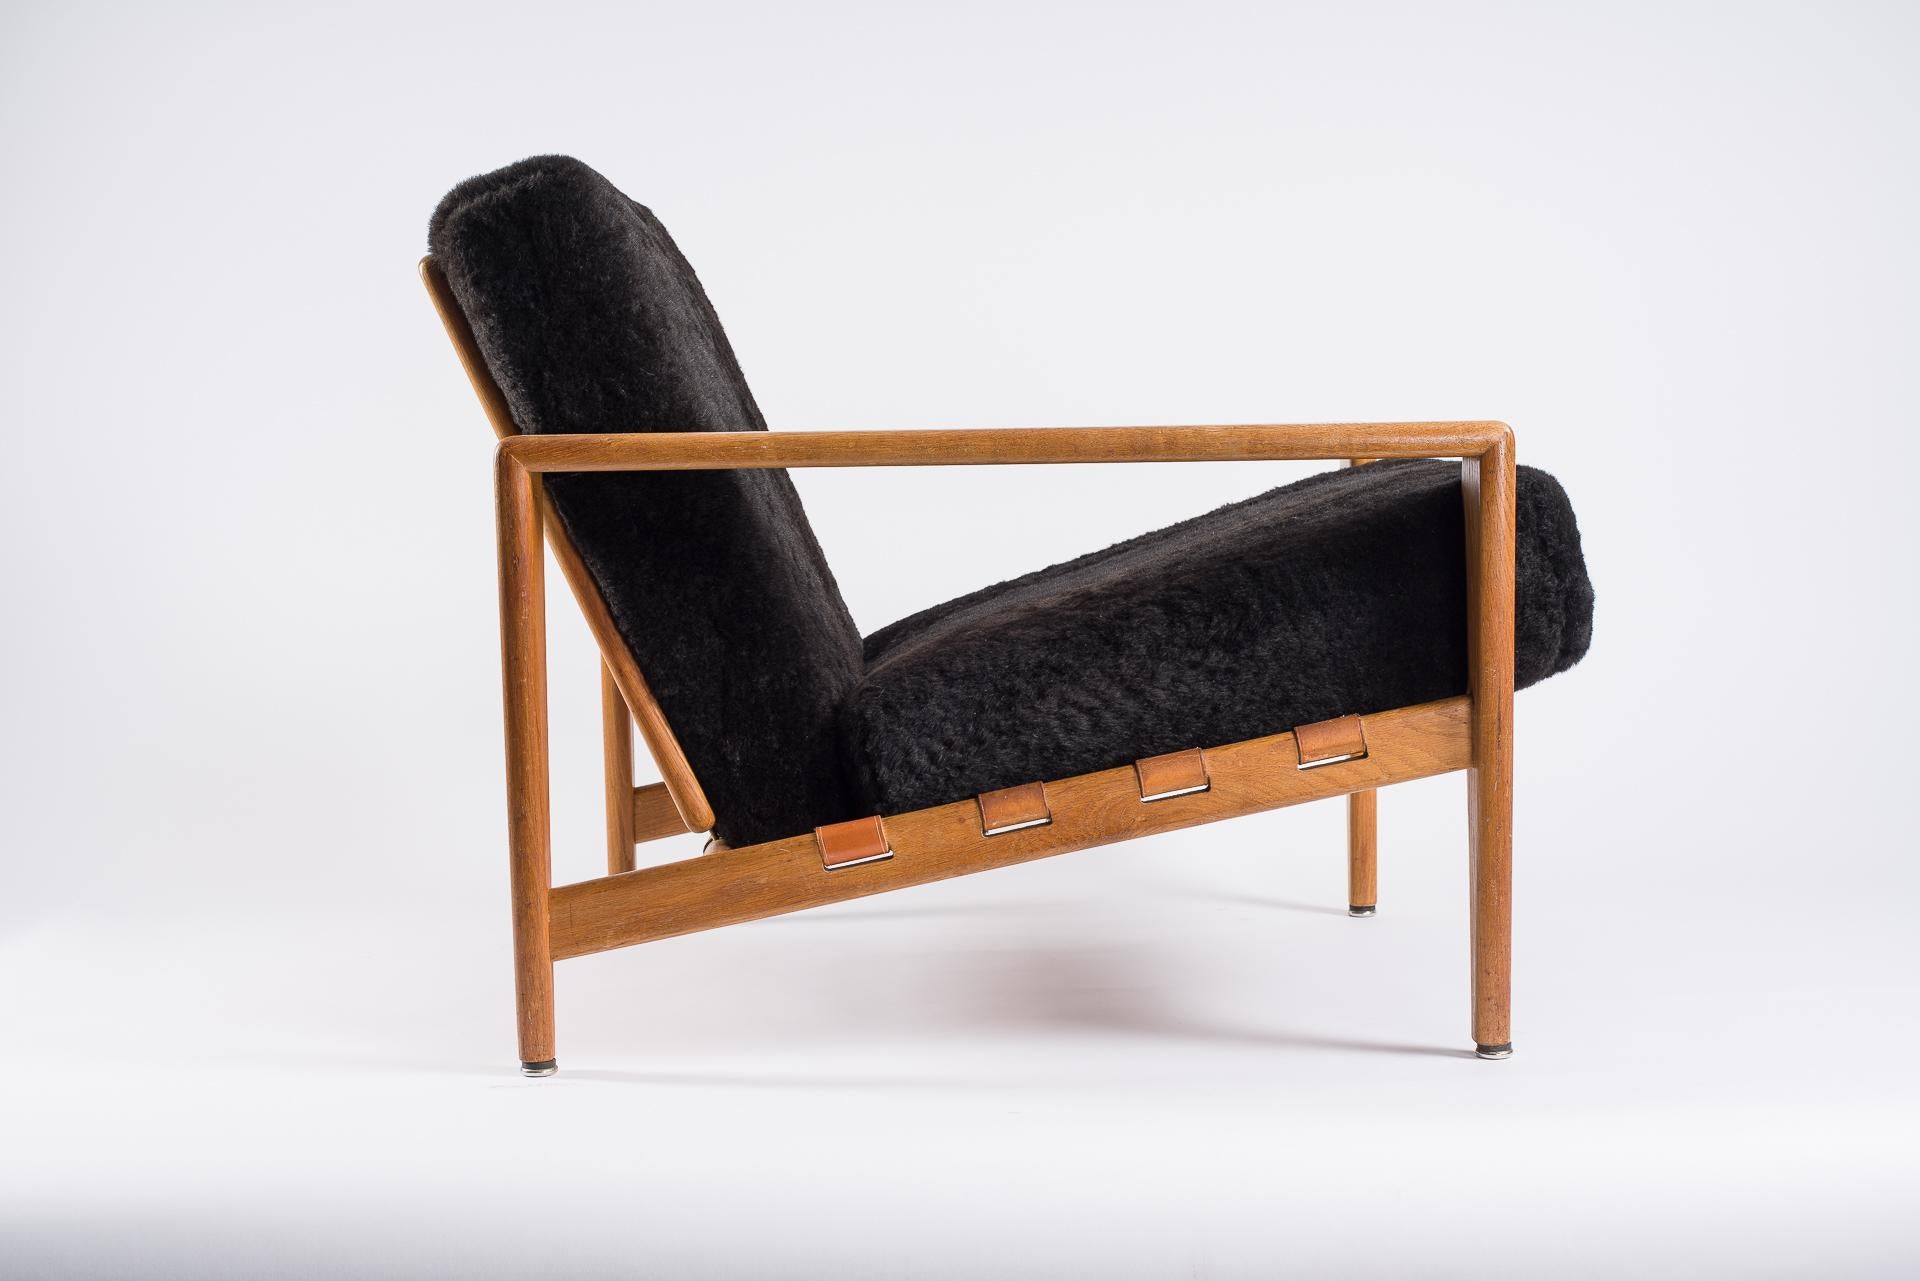 Oak Swedish lounge chairs.
Pair of armchairs newly upholstered with black lambskin and leather ties.
Leather in very good conditions without cracks.
Bodö easy chair from AB Hjertquist & Nässjö
Designed by Svante Skogh in 1957.
 